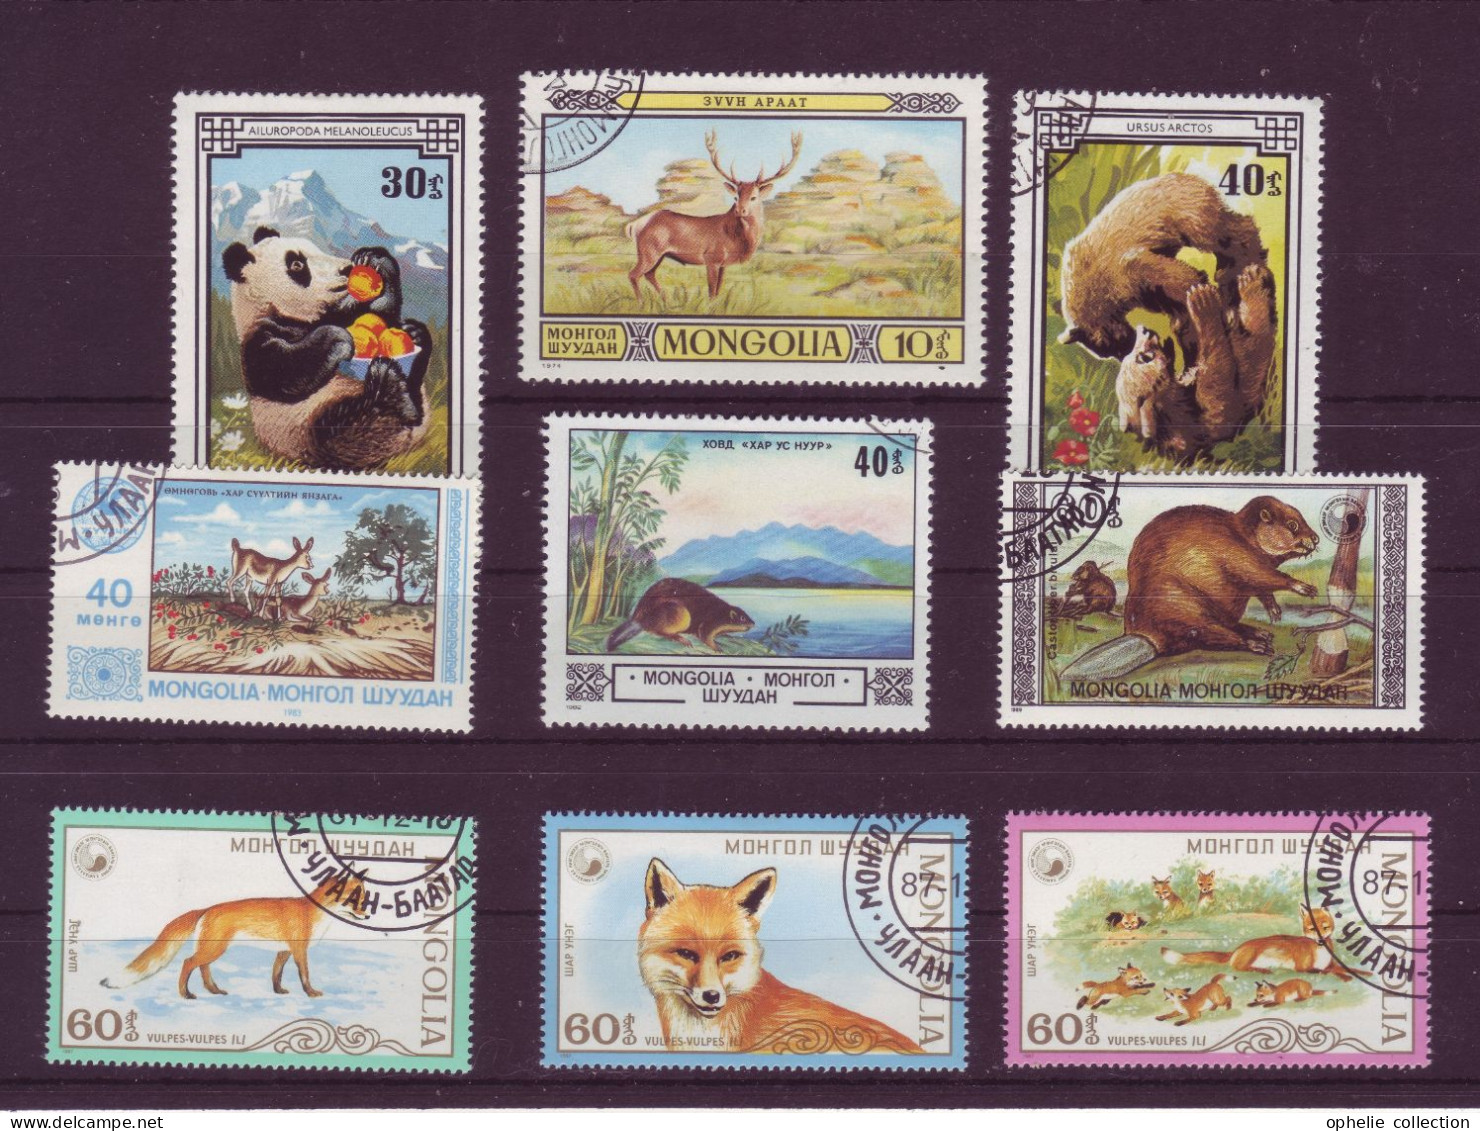 Asie - Mongolie - Faune - 9 Timbres Différents - 7020 - Mongolei